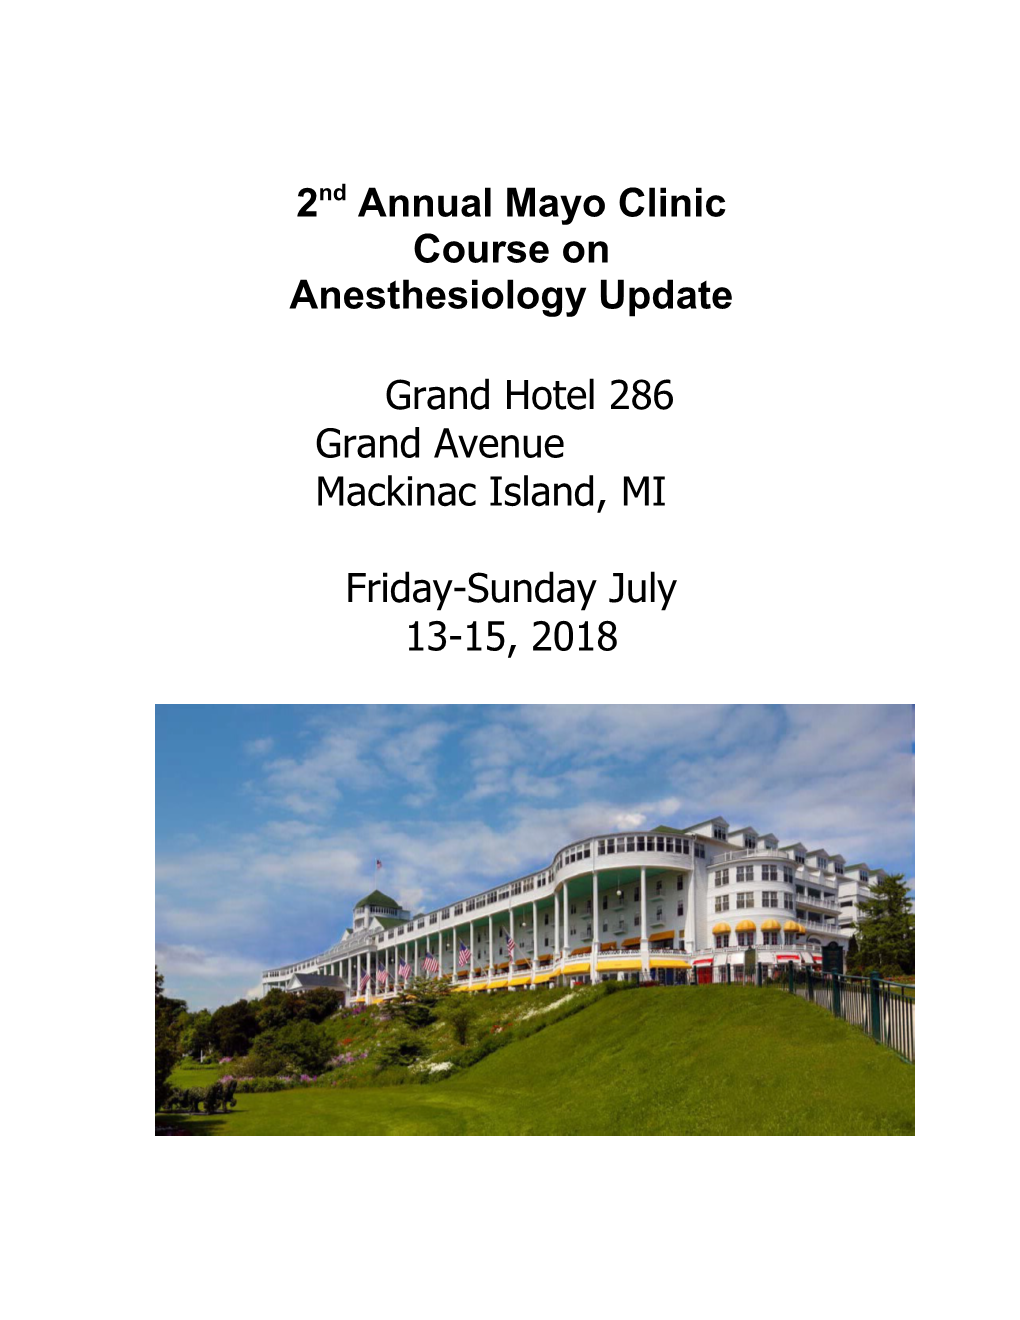 2Nd Annual Mayo Clinic Course on Anesthesiology Update